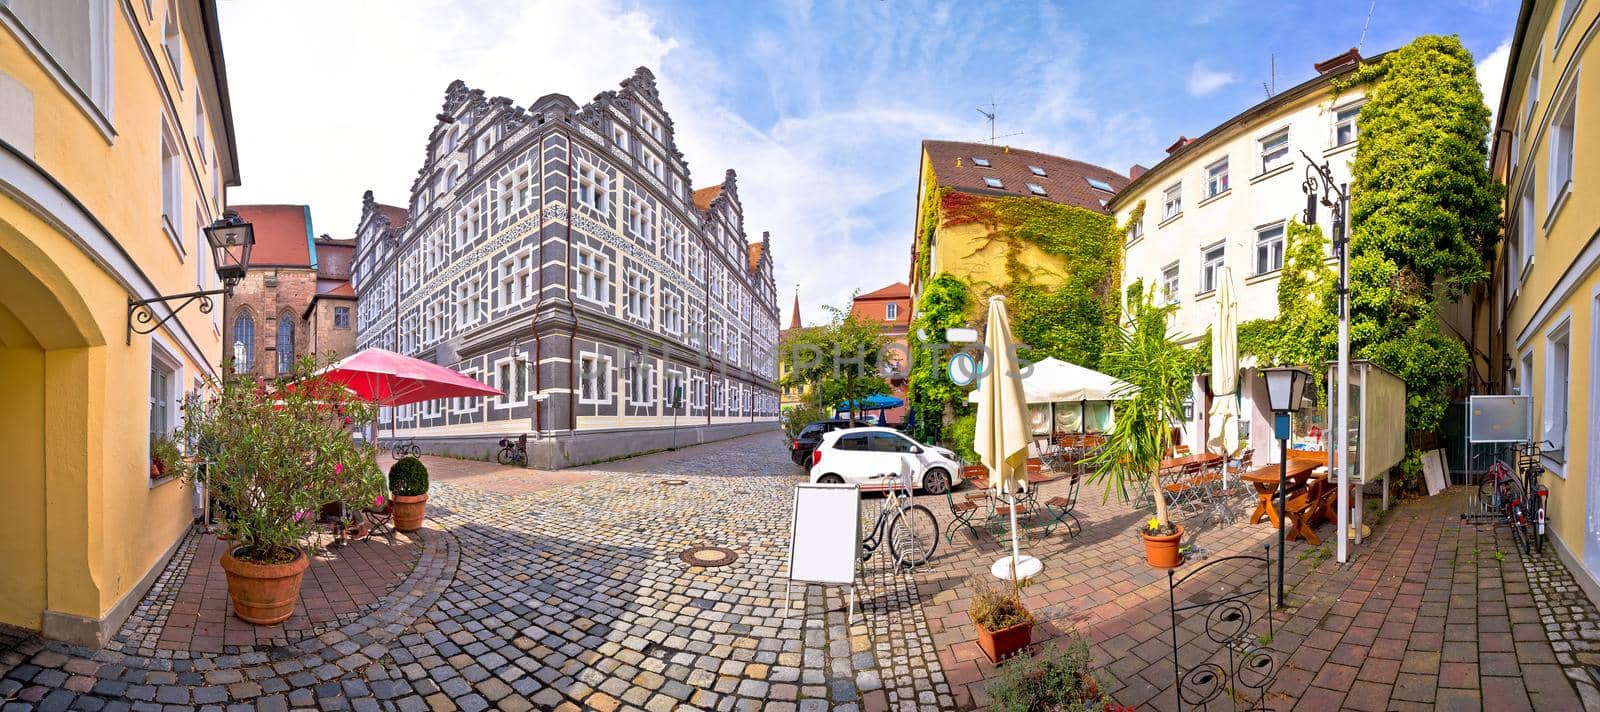 Ansbach. Old town of Ansbach beer garden and street panoramic view by xbrchx